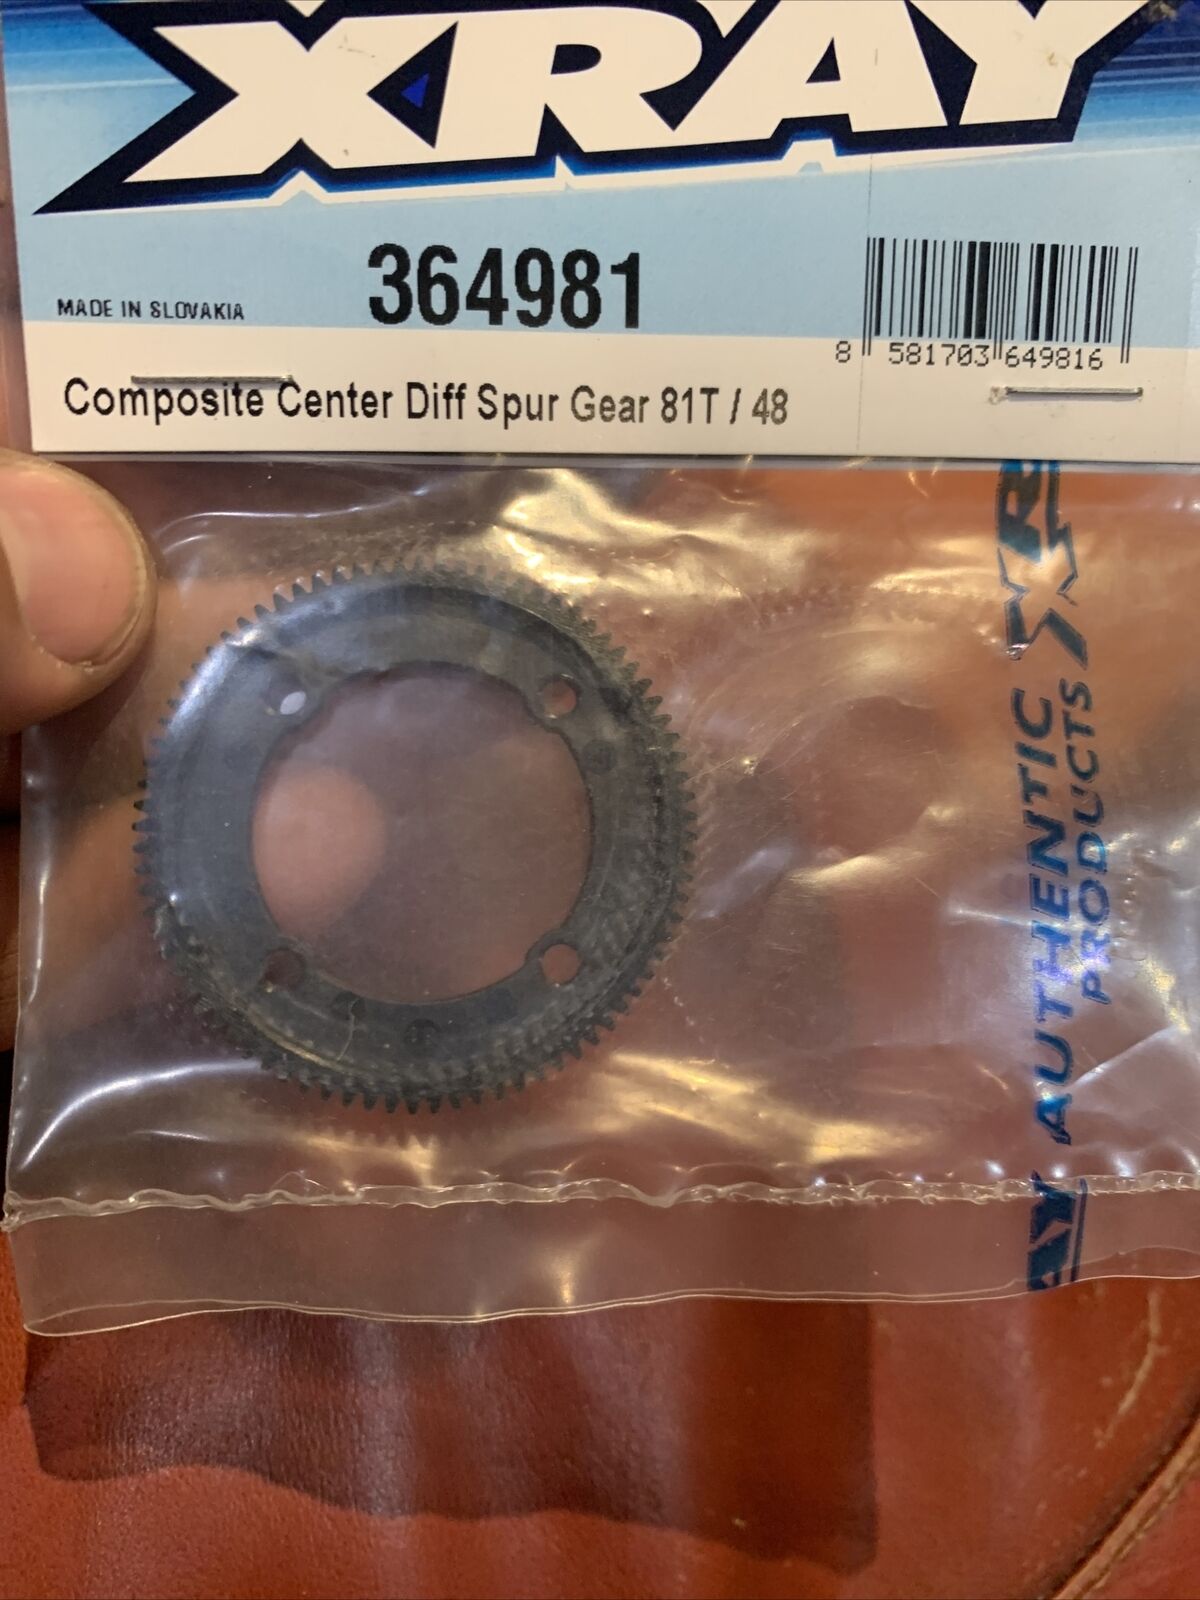 Xray 48P Composite Center Gear Differential Spur Gear (81T) [XRA364981]